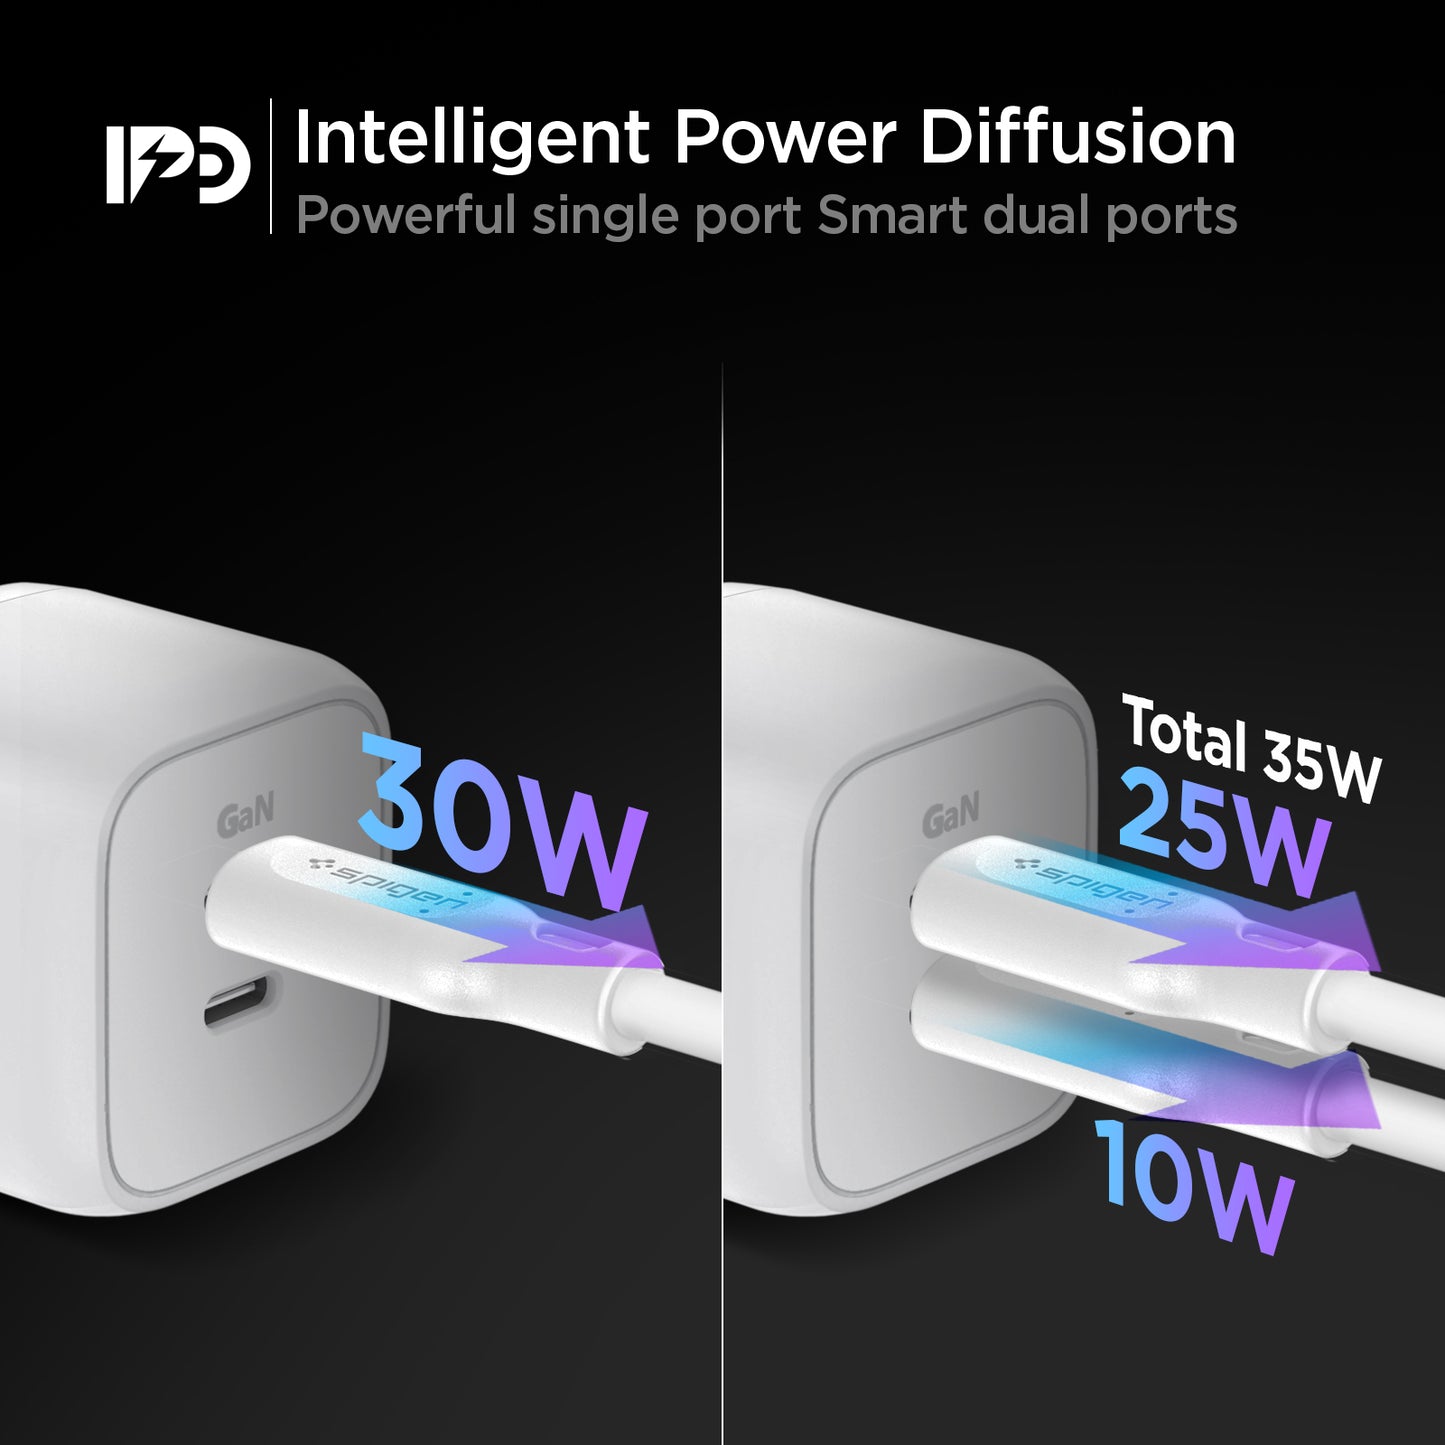 ACH03713 - ArcStation™ Pro GaN 352 Dual Port Wall Charger PE2104 in White showing the Intelligent Power Diffusion, powerful single and smart dual ports. 2 charger single port with 30W and dual port with a total of 35W